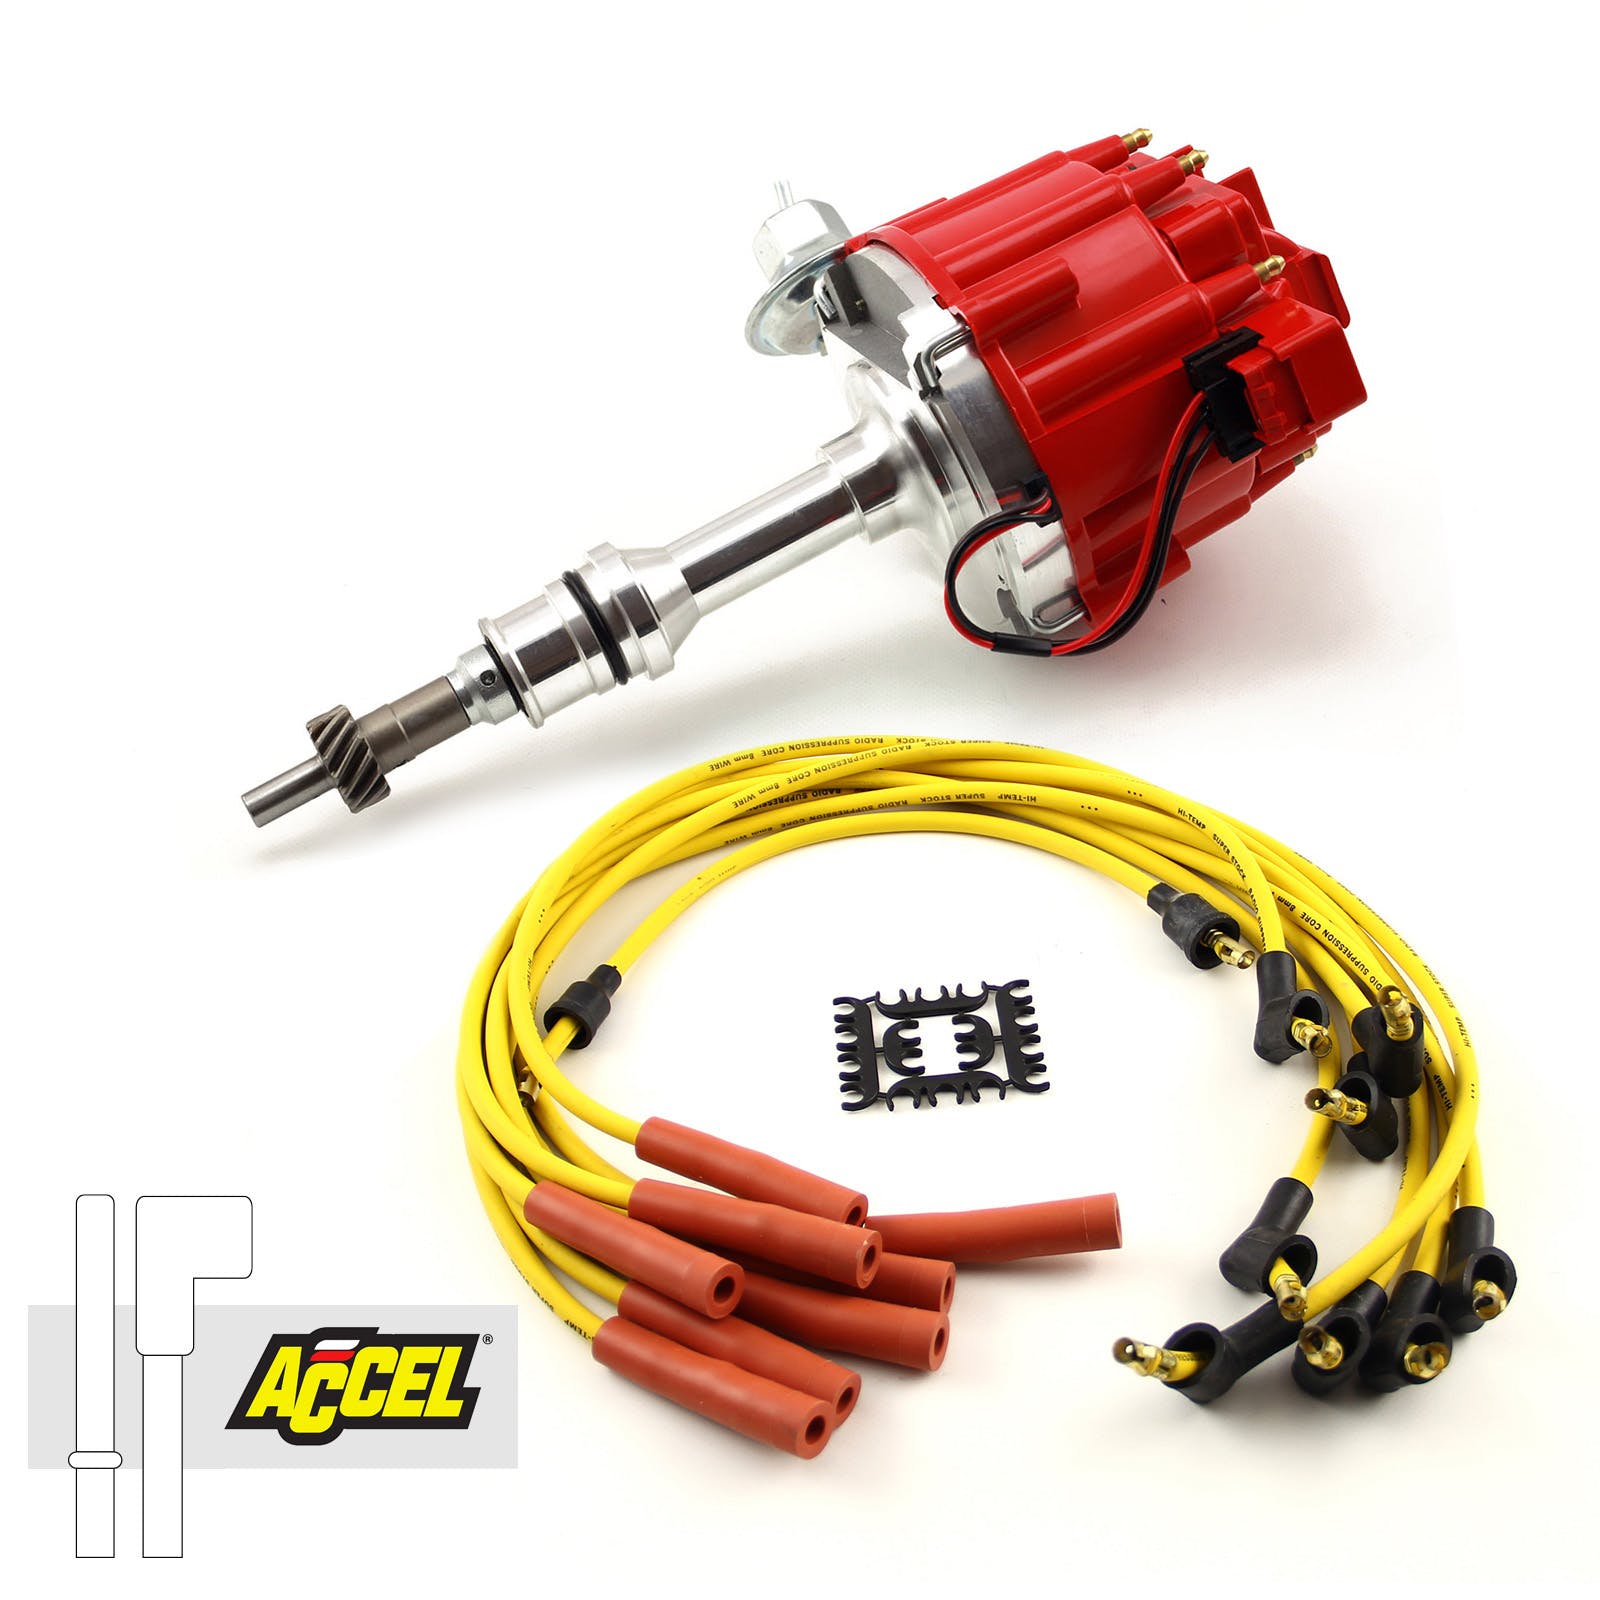 Speedmaster PCE385.1034 HEI Distributor Accel Spark Plug Wires Ignition Combo Kit